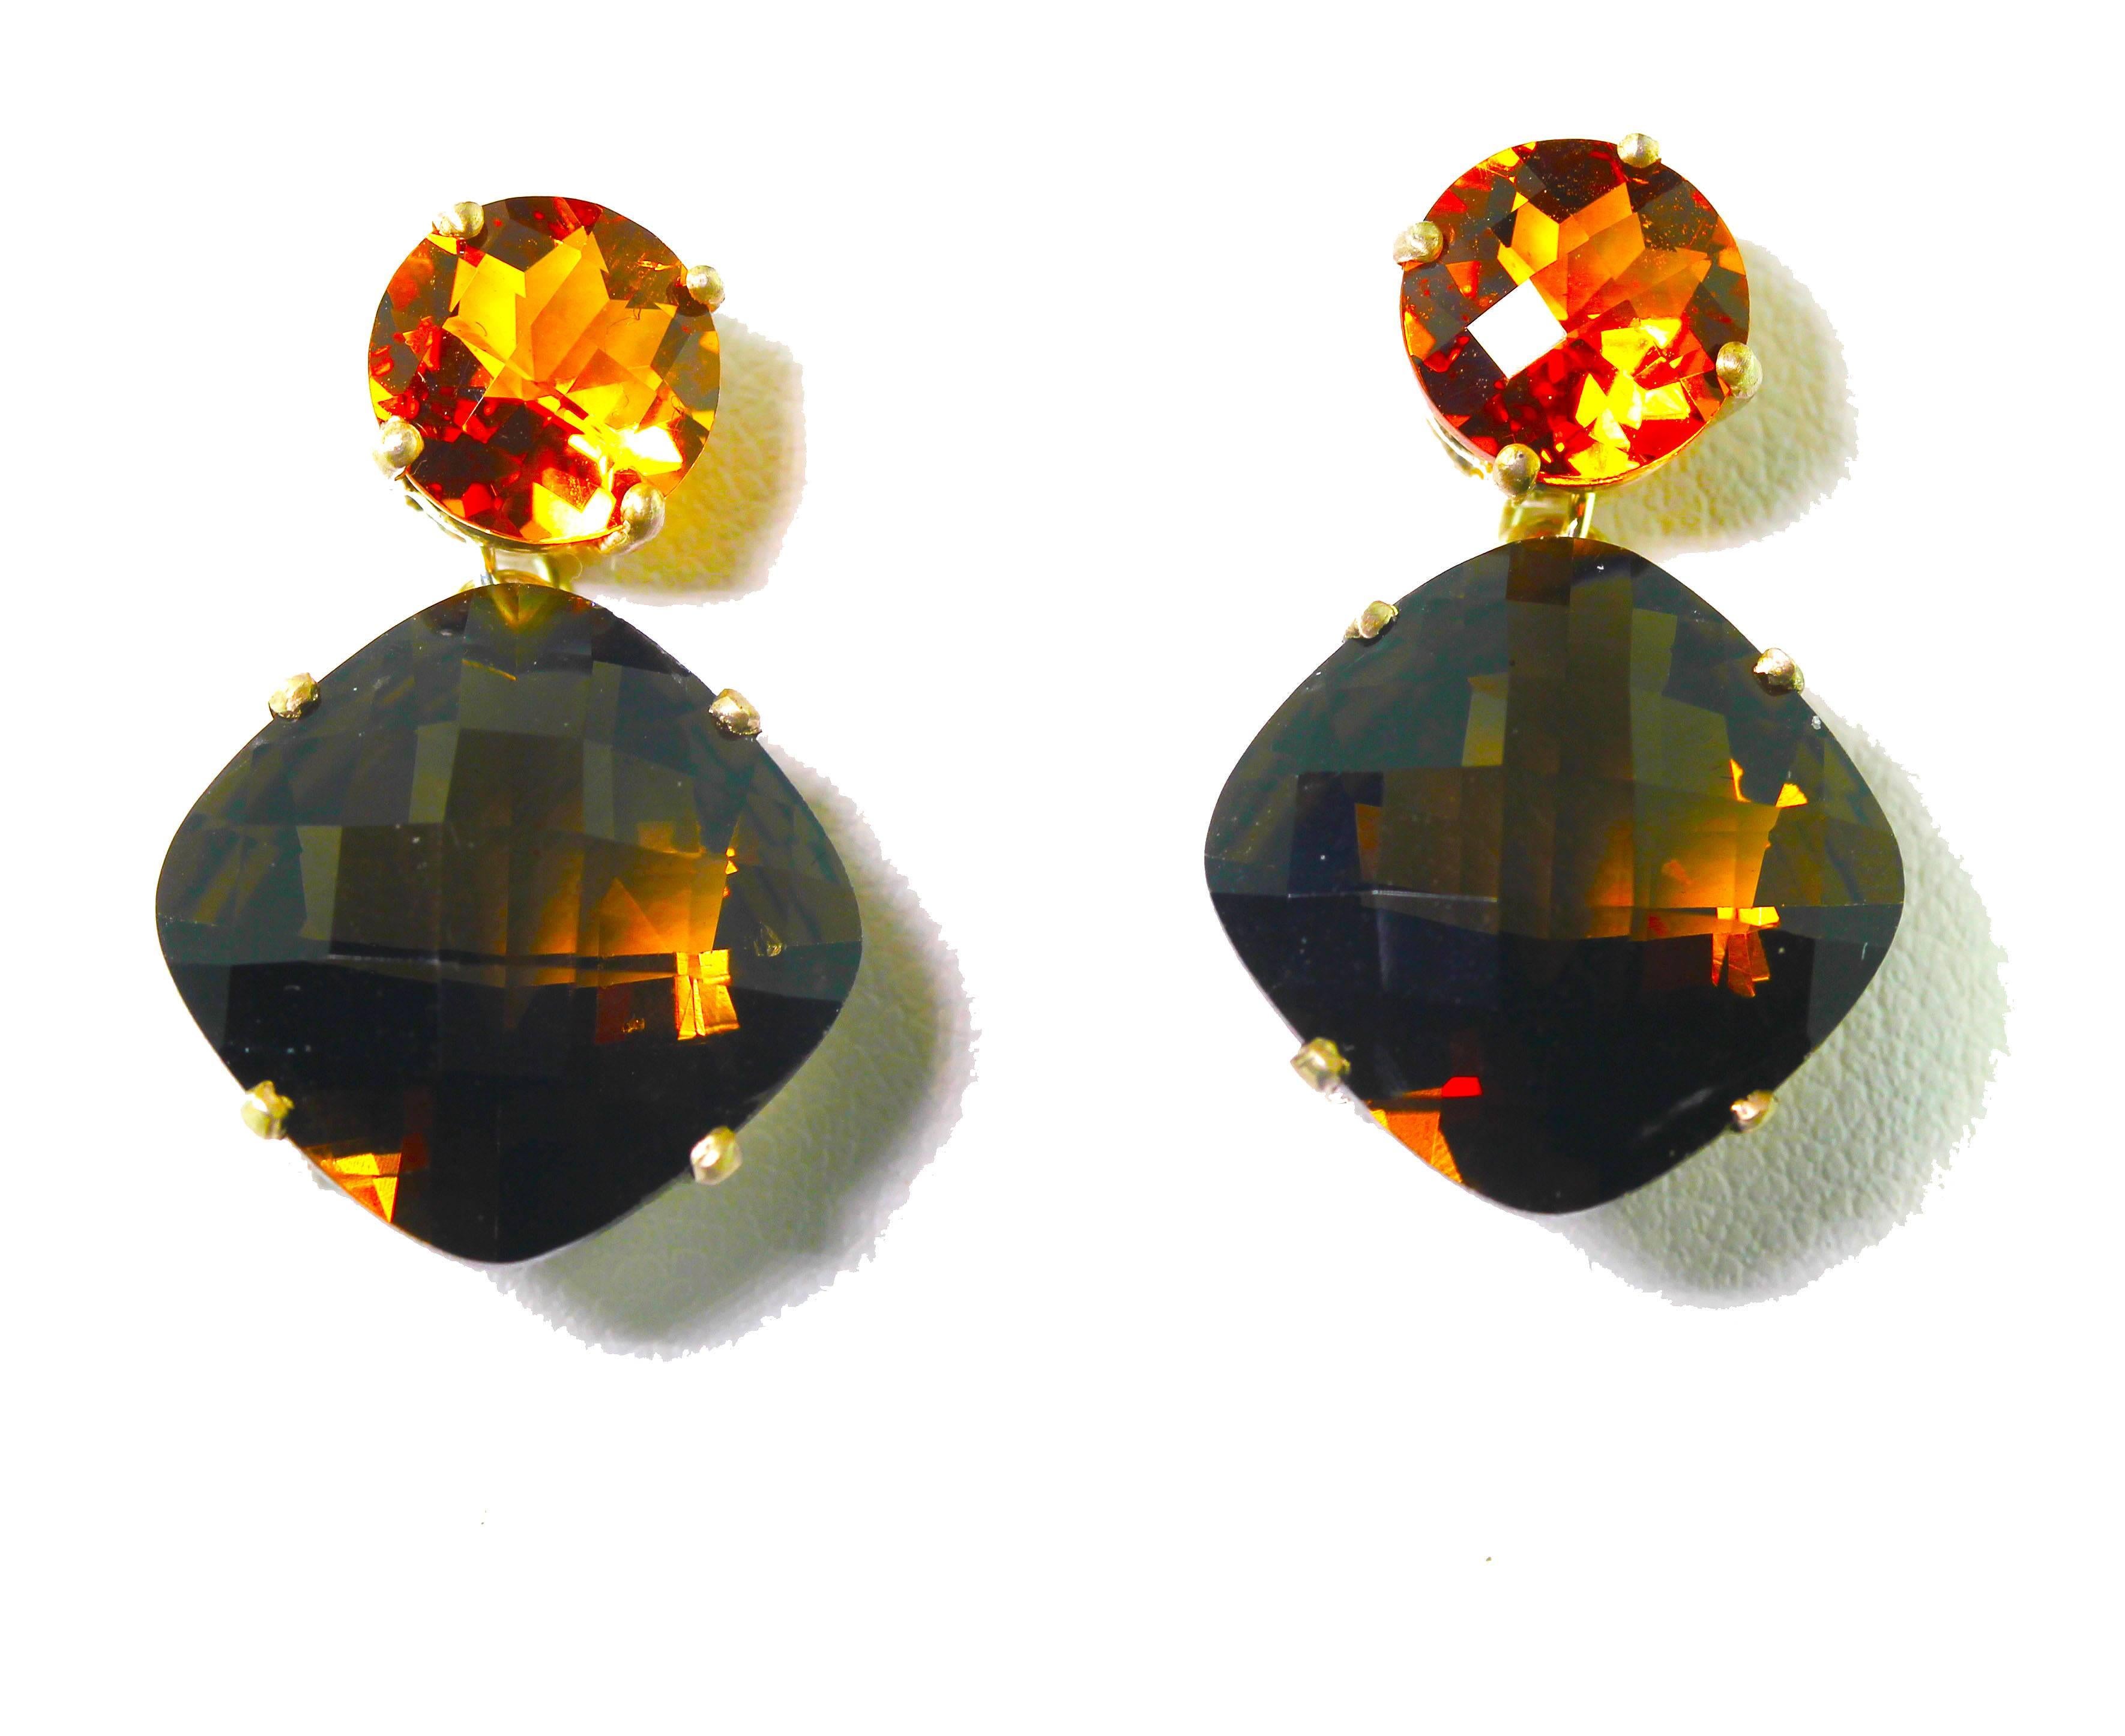 Round 1.48 carats each Madagascar Citrine (8 mm) dangle these exquisite sparkling 9 carats each of checkerboard Smoky Quartz (14 mm x 14 mm) set in sterling silver stud earrings.  They measure 1 inch long. 